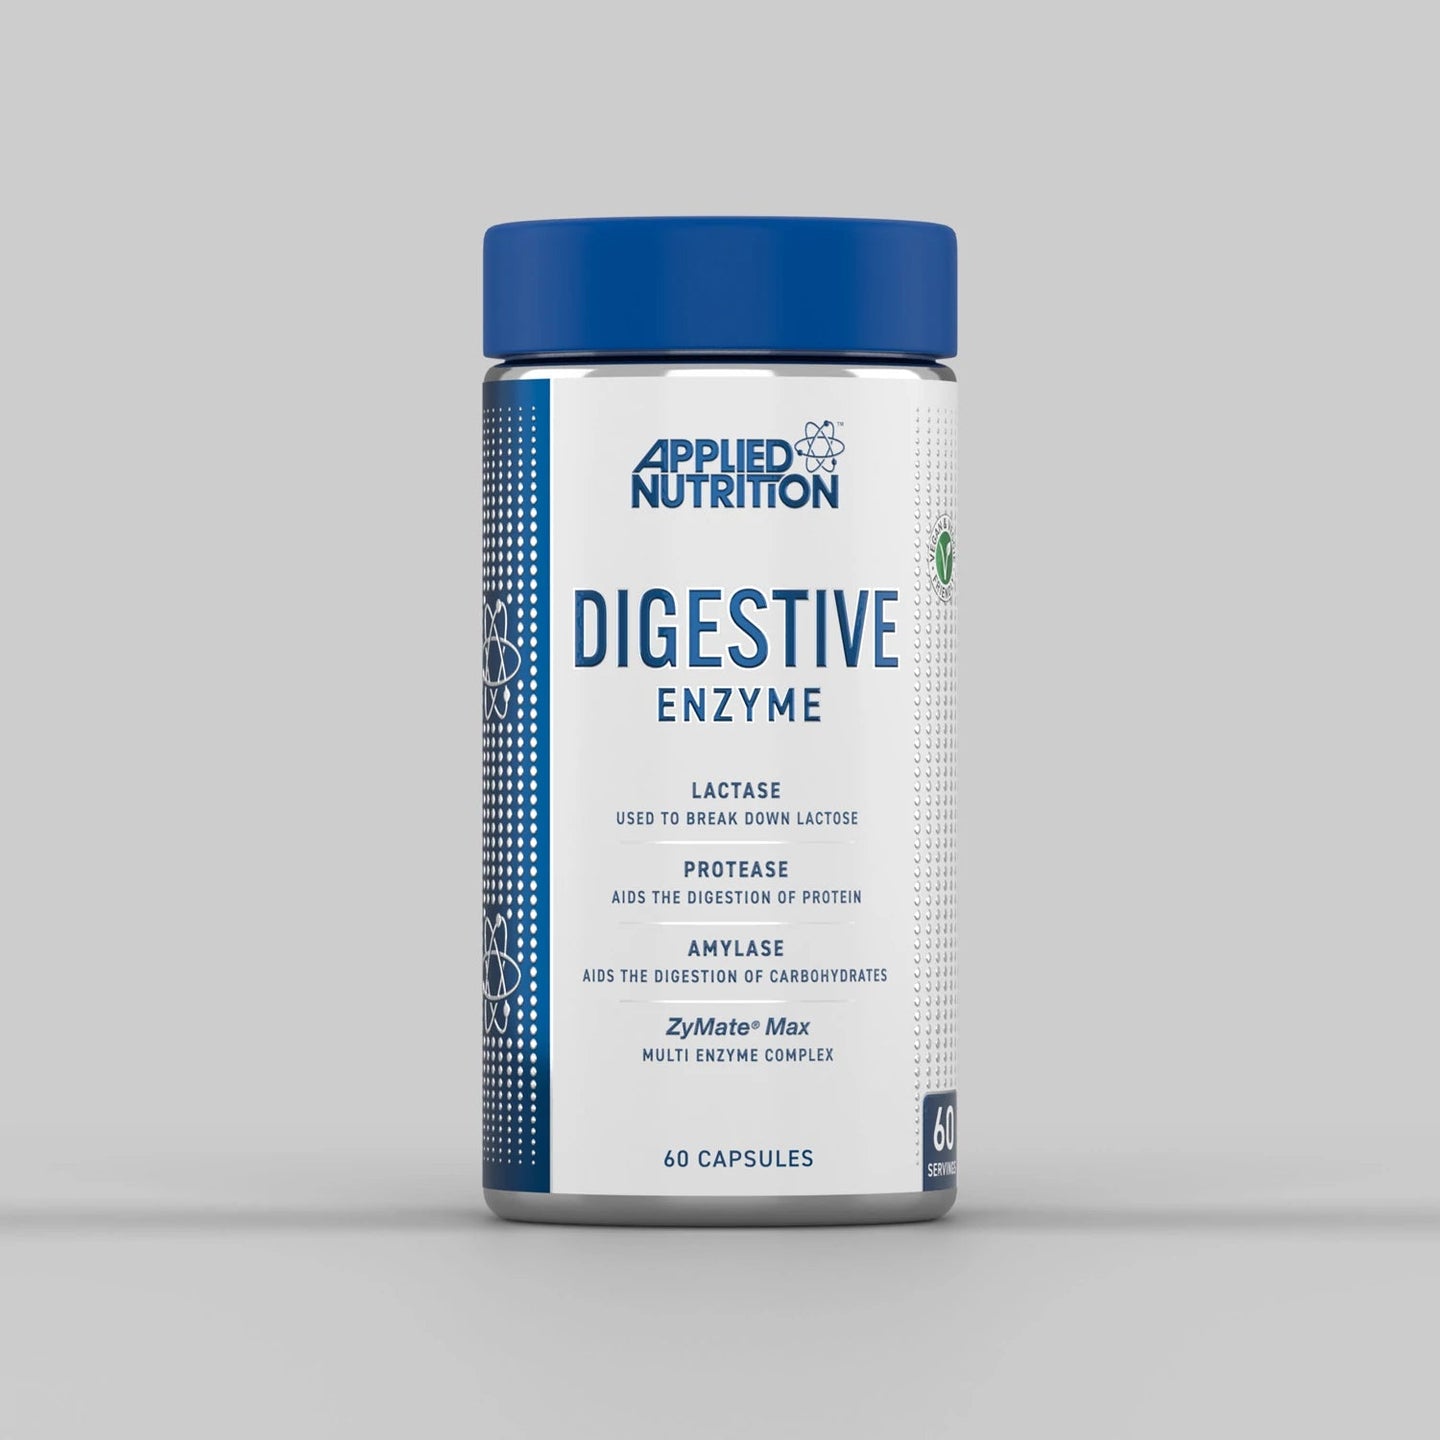 Applied Nutrition Digestive Enzyme - 60 Capsules